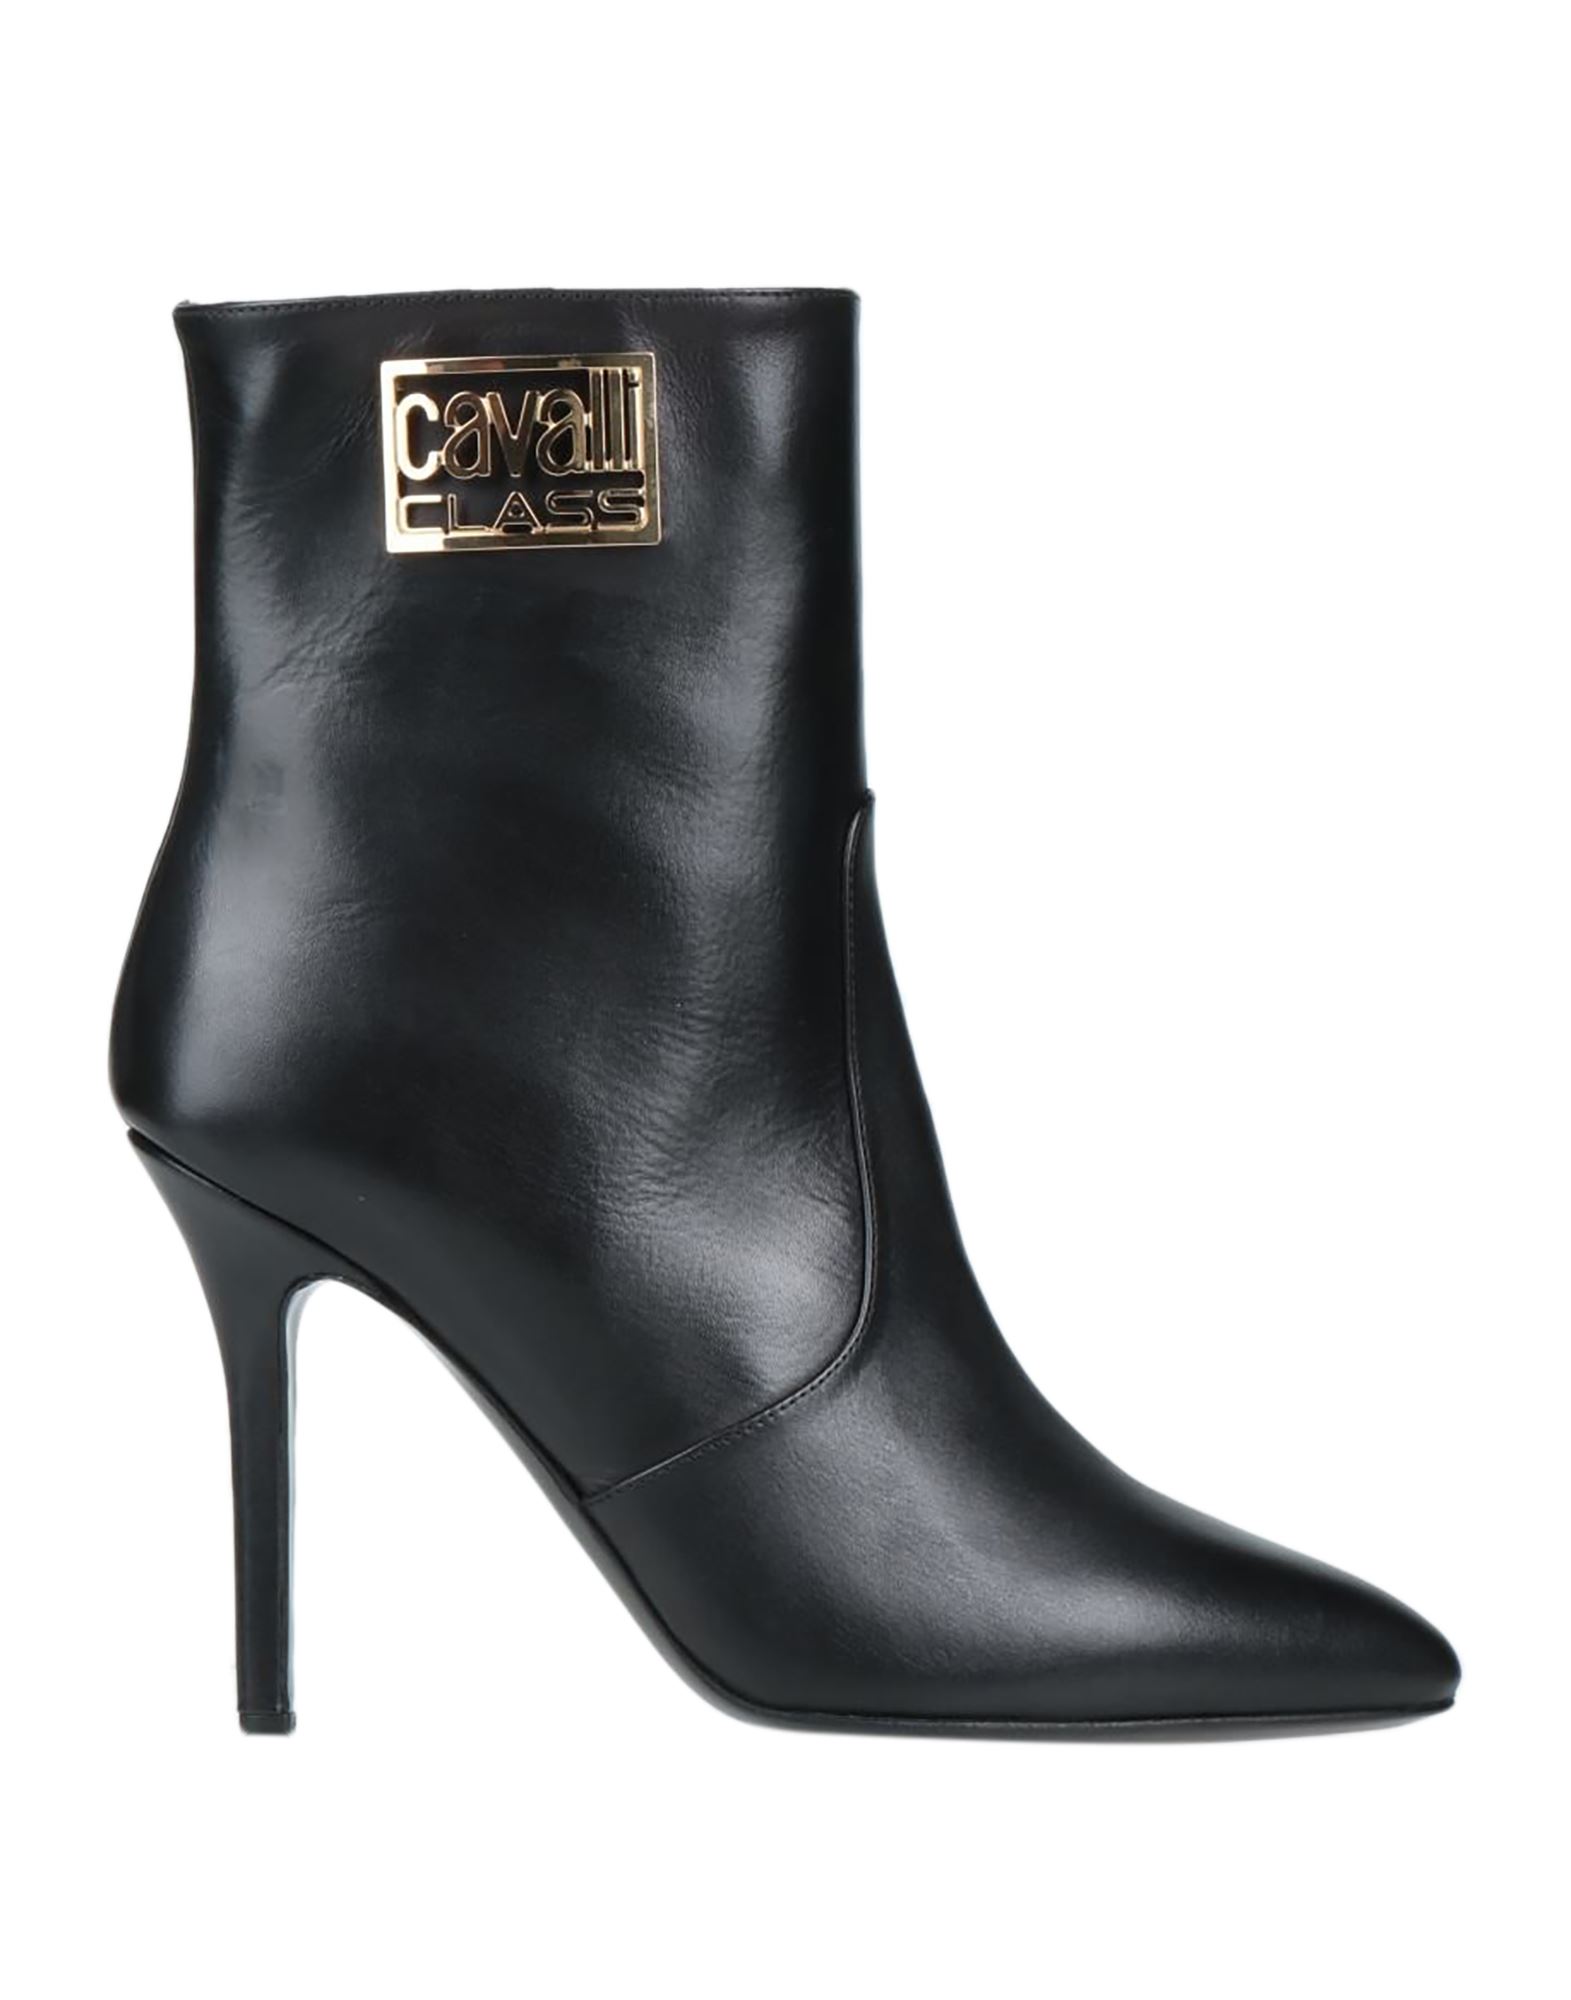 Cavalli Class Ankle Boots In Black